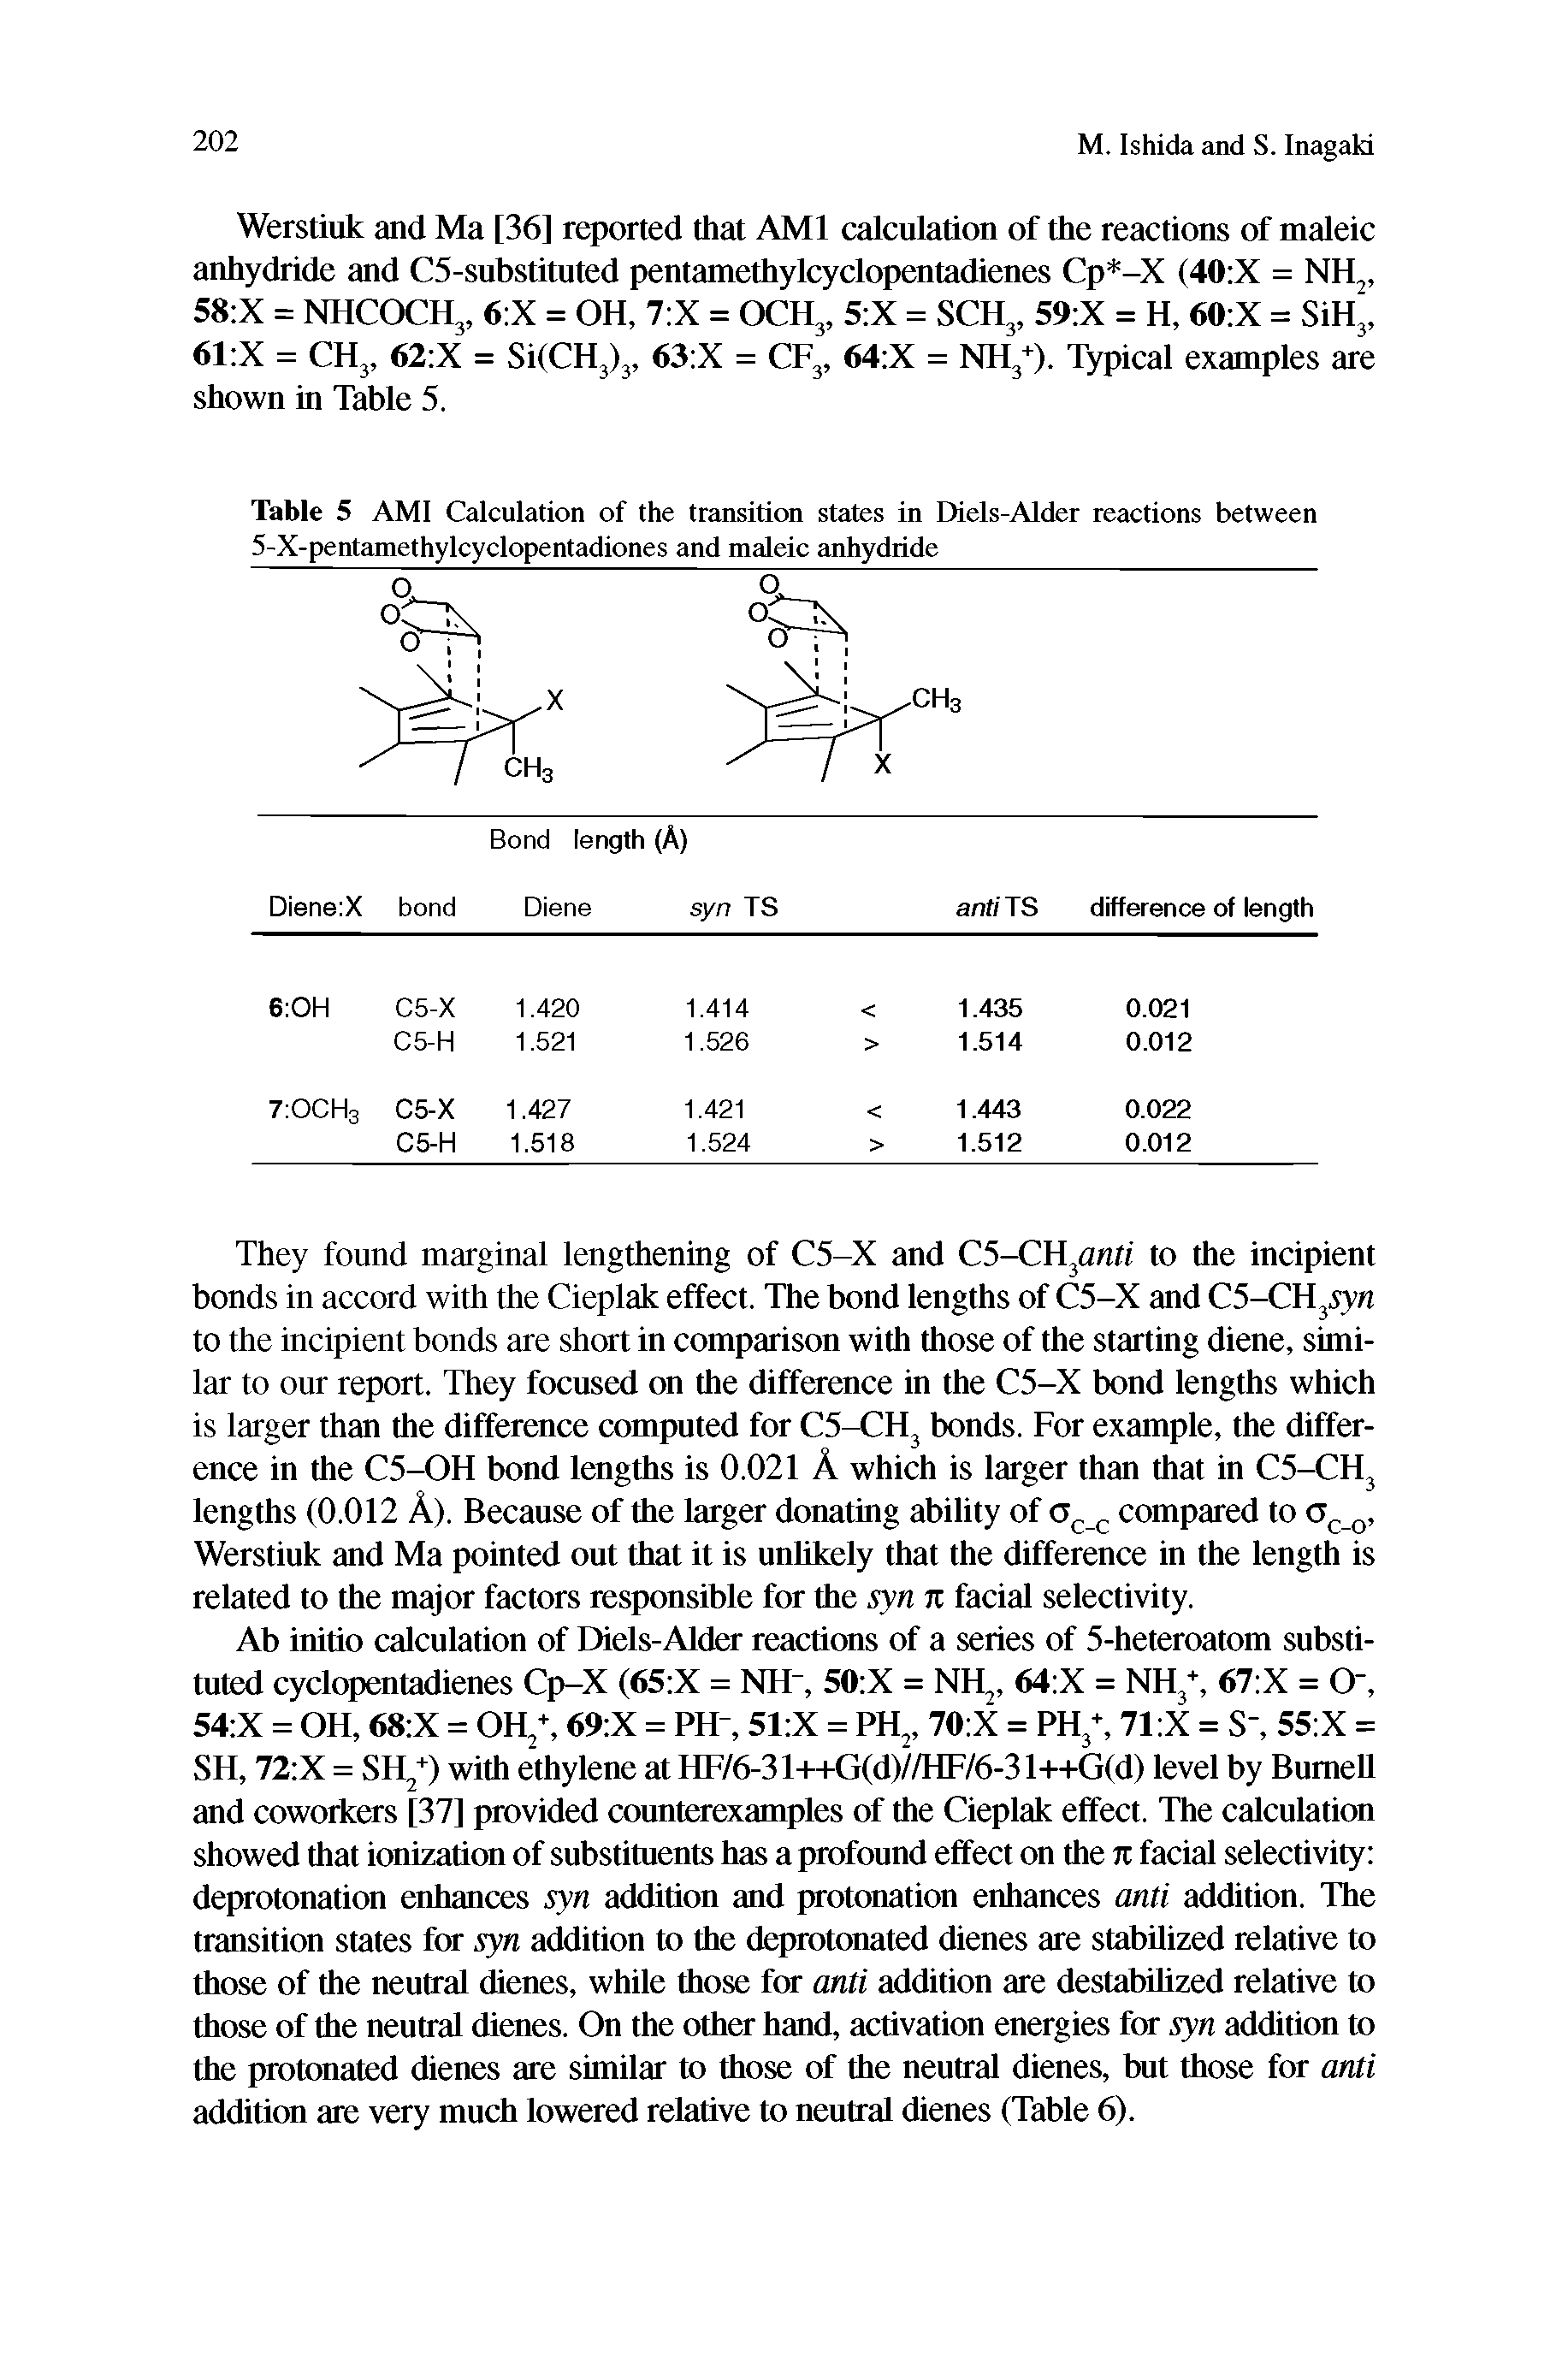 Table 5 AMI Calculation of the transition states in Diels-Alder reactions between 5-X-pentamethylcyclopentadiones and maleic anhydride...